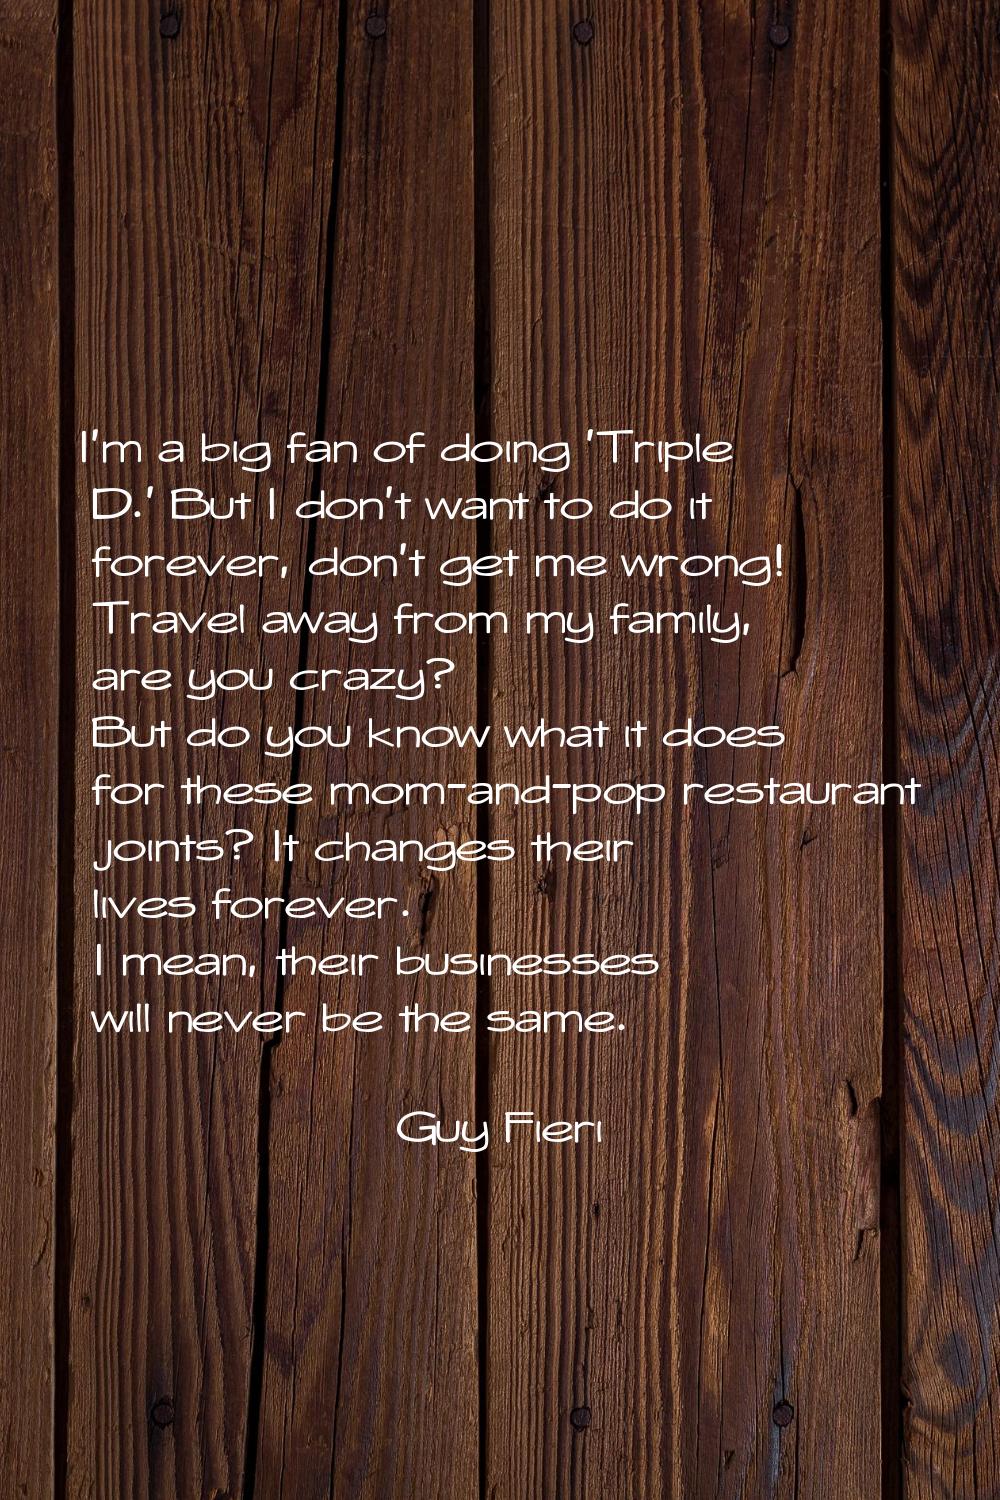 I'm a big fan of doing 'Triple D.' But I don't want to do it forever, don't get me wrong! Travel aw